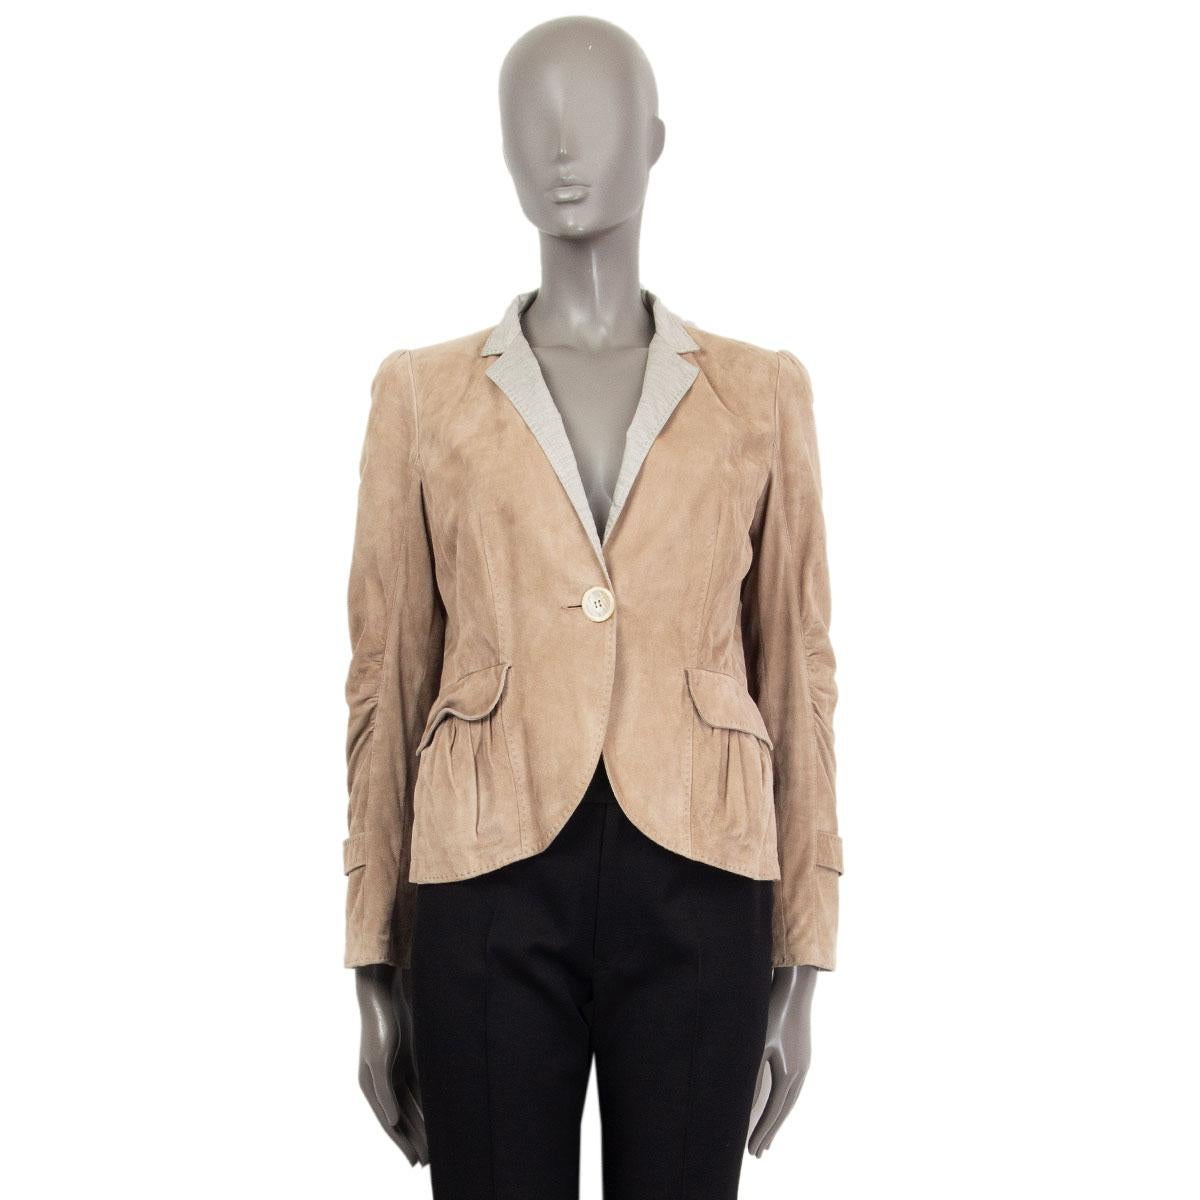 authentic Brunello Cucinelli single breasted one button jacket in beige suede leather (100%) and in gray cotton (100%) neck with flap pleated pockets and embellished cuffs. Closes with one button on the front and has a belt detail on the back. Is